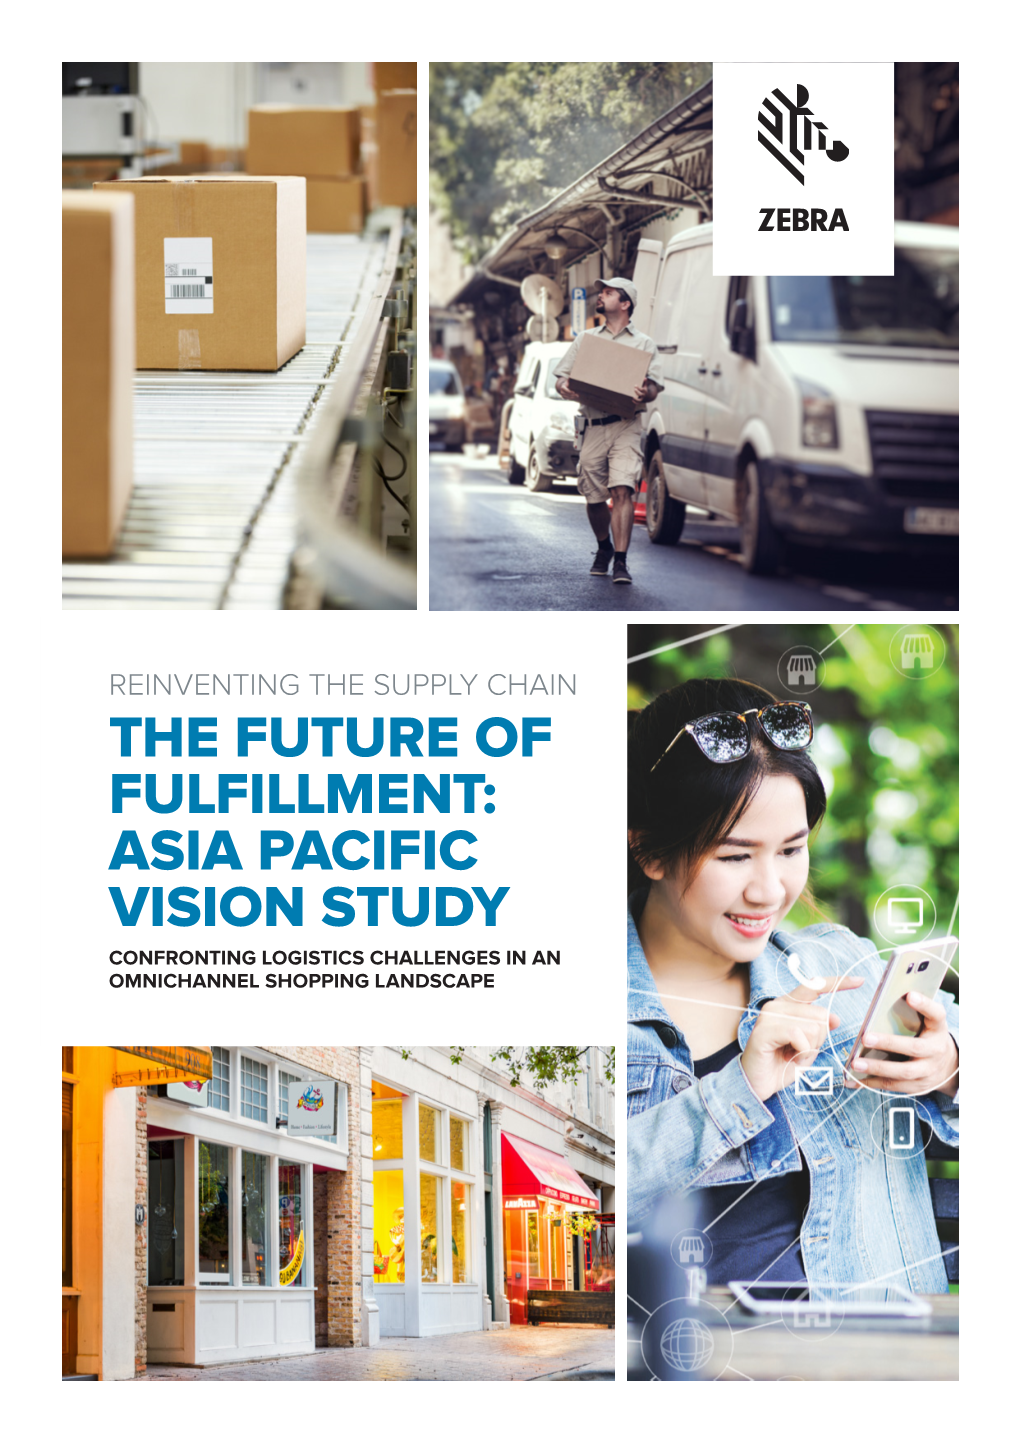 Asia Pacific Vision Study